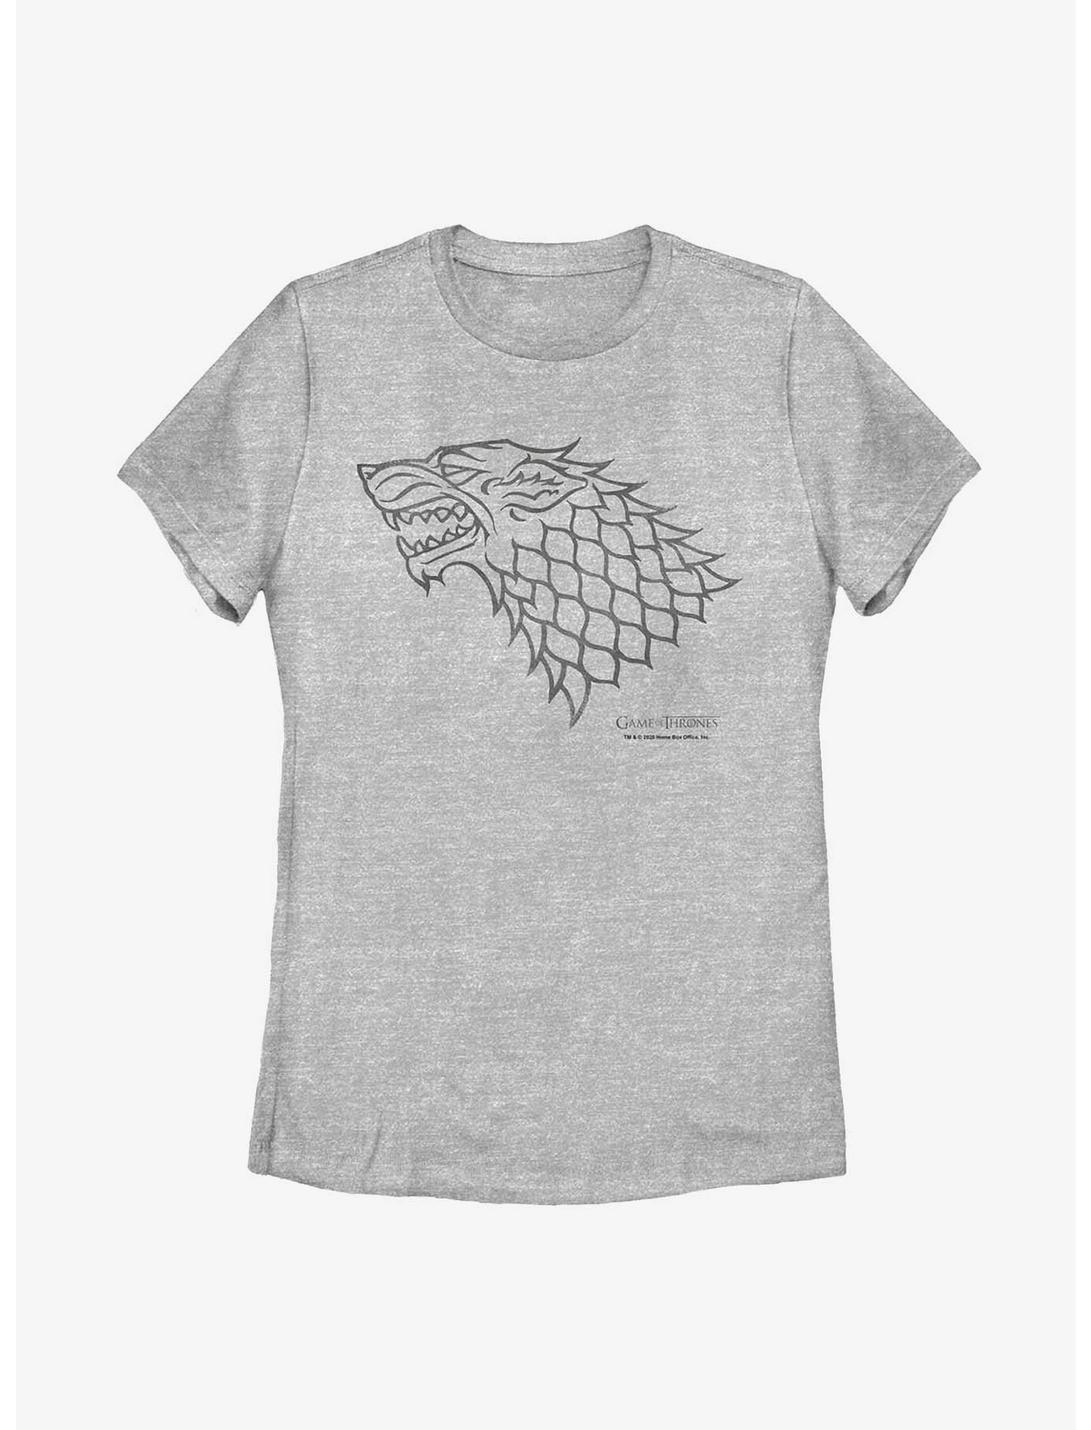 Plus Size Game Of Thrones House Stark Emblem Womens T-Shirt, ATH HTR, hi-res